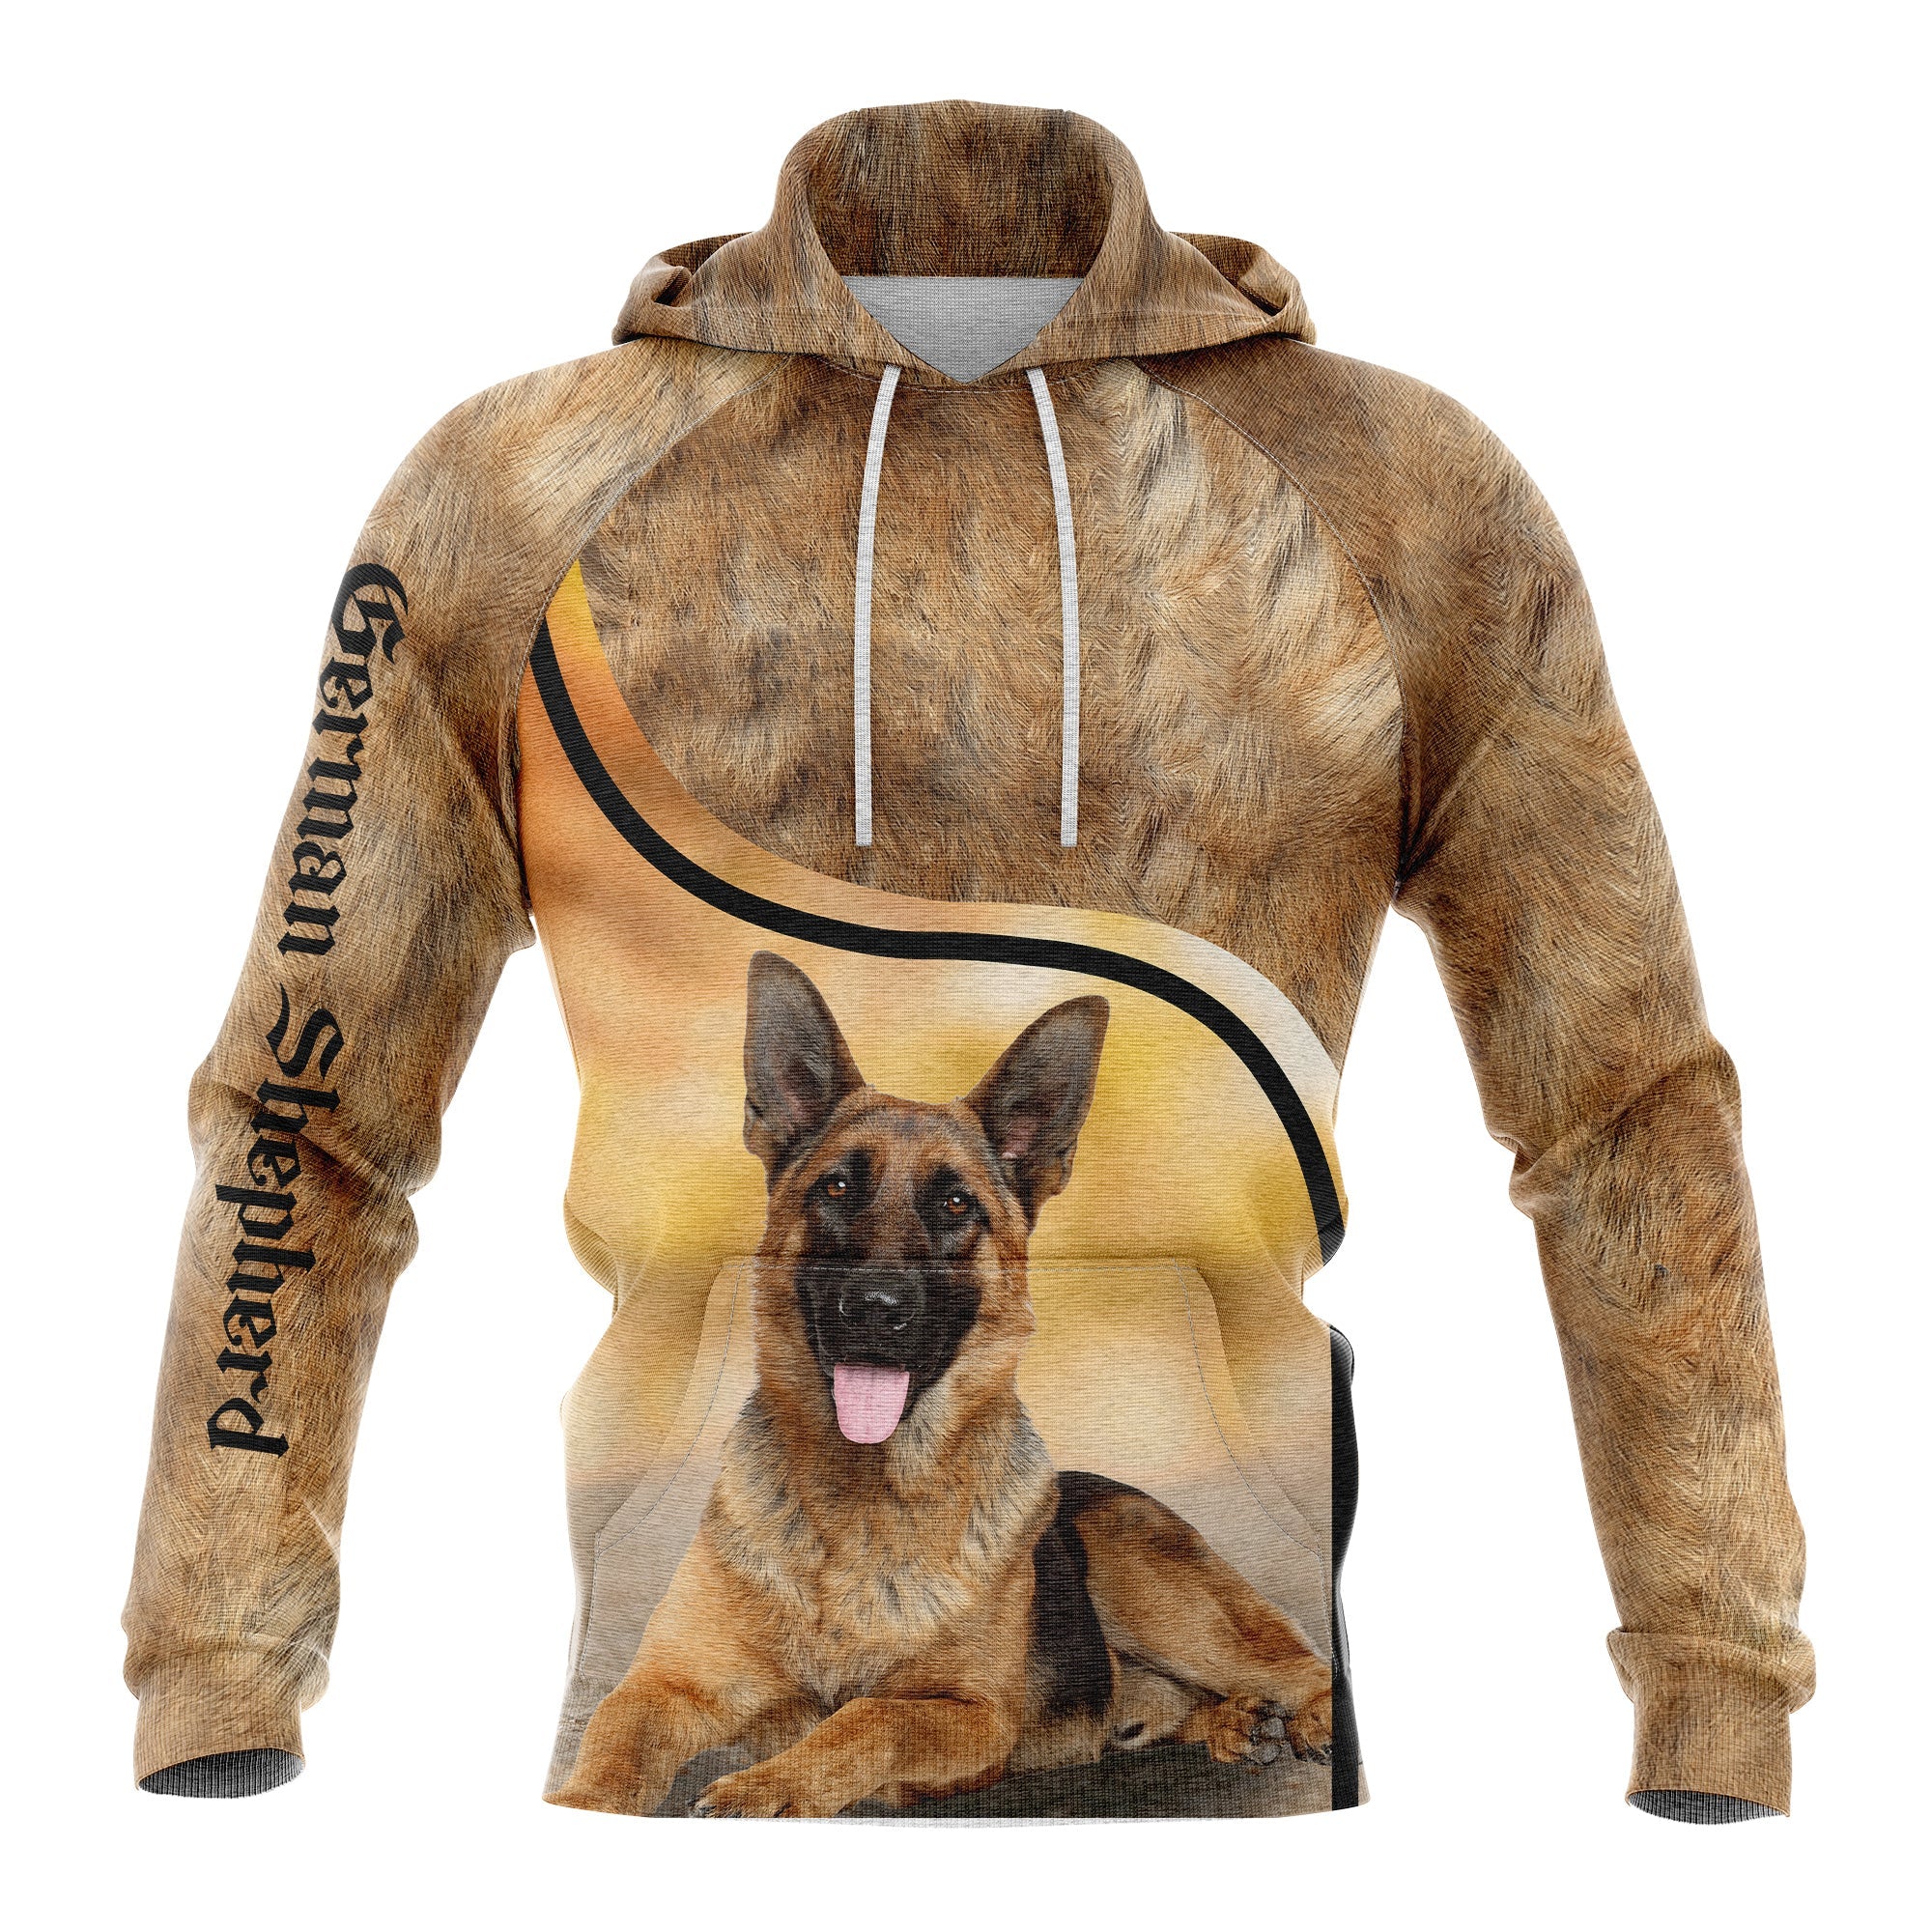 Great German Shepherd Pullover Premium Hoodie, Perfect Outfit For Men And Women On Christmas New Year Autumn Winter